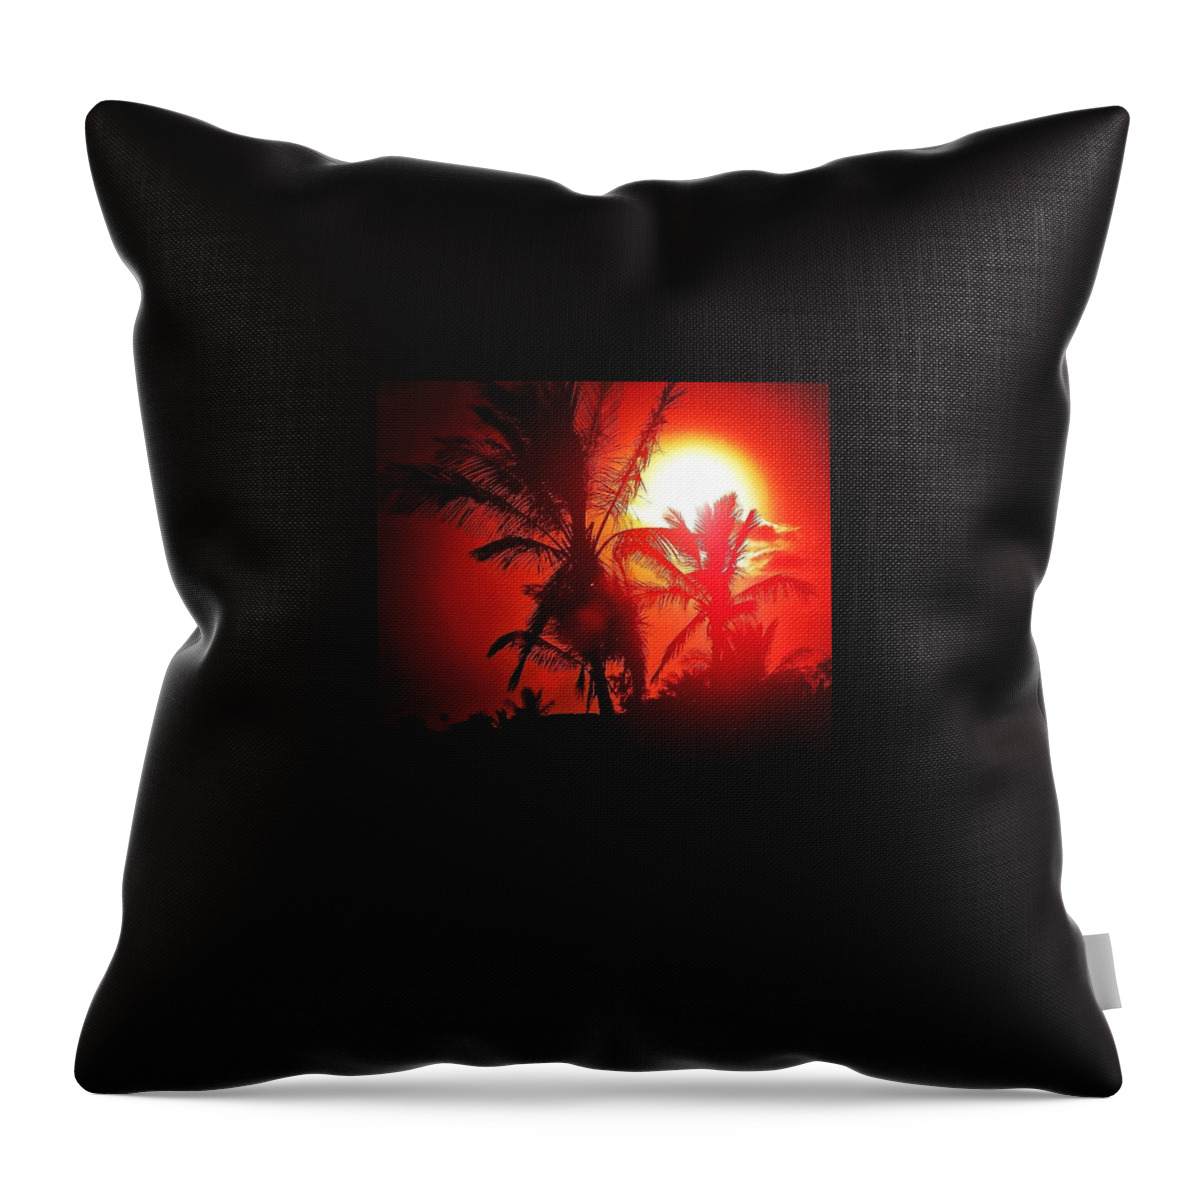 Lanzarote Throw Pillow featuring the photograph Lanzarote Dusk by Phil Tomlinson